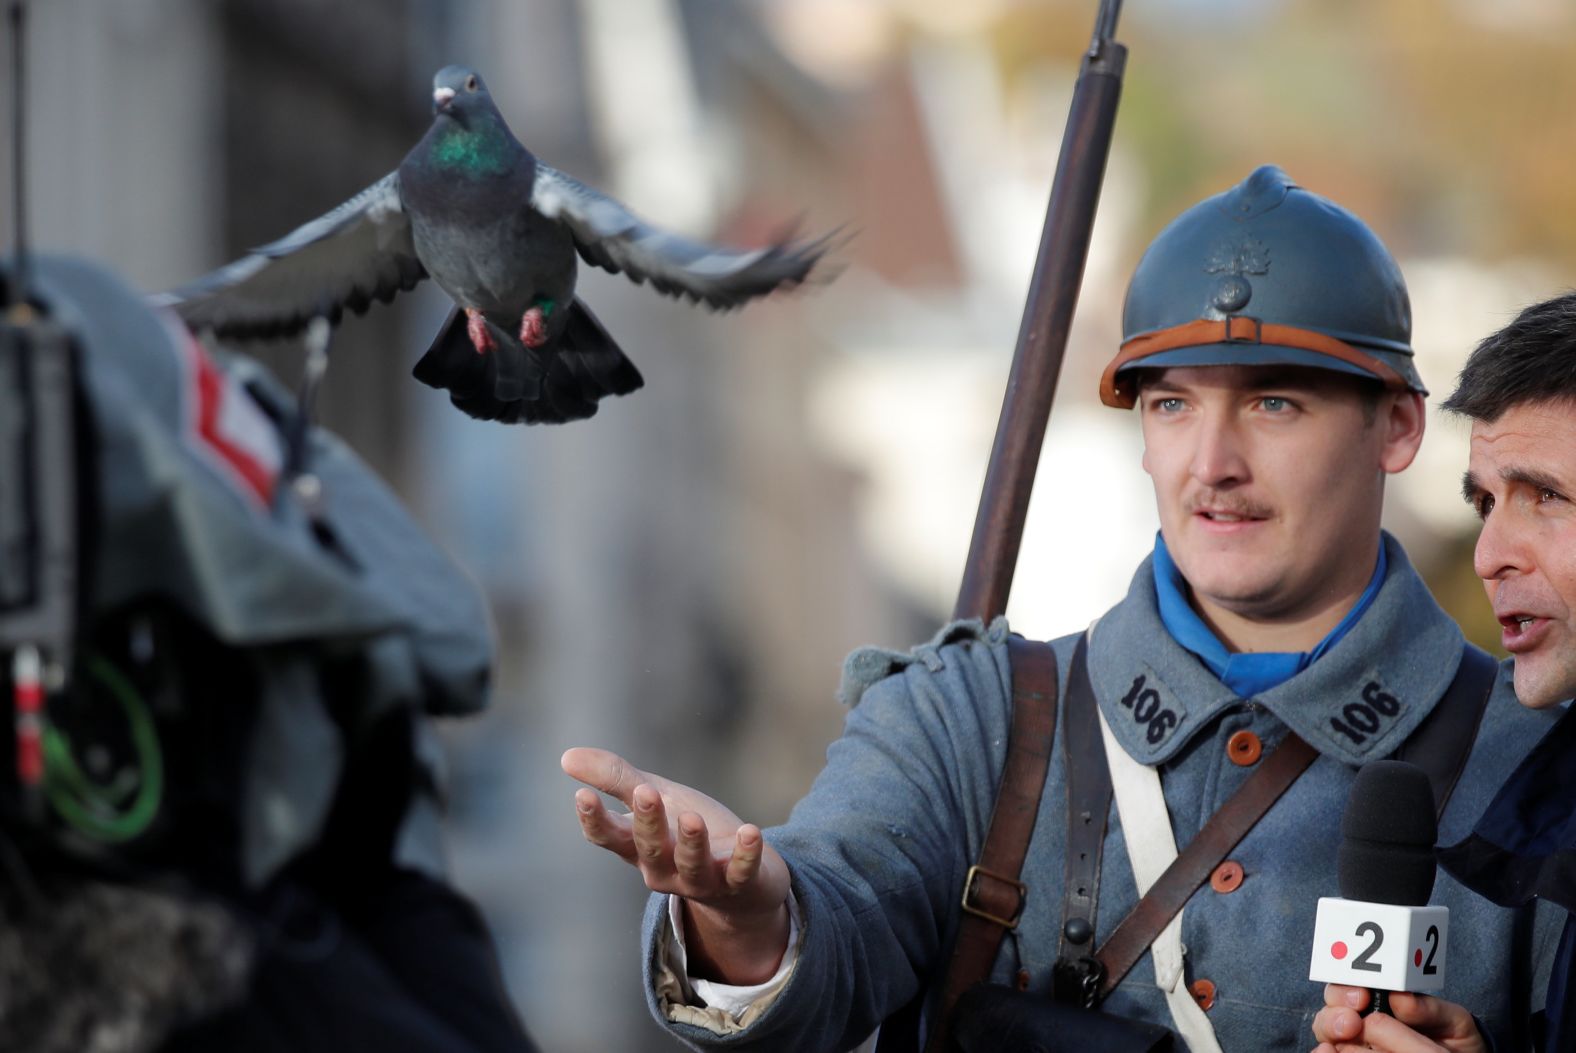 A history enthusiast dressed as a French soldier delivers a pigeon during a commemoration ceremony for Armistice Day in Epernay, France on Sunday.